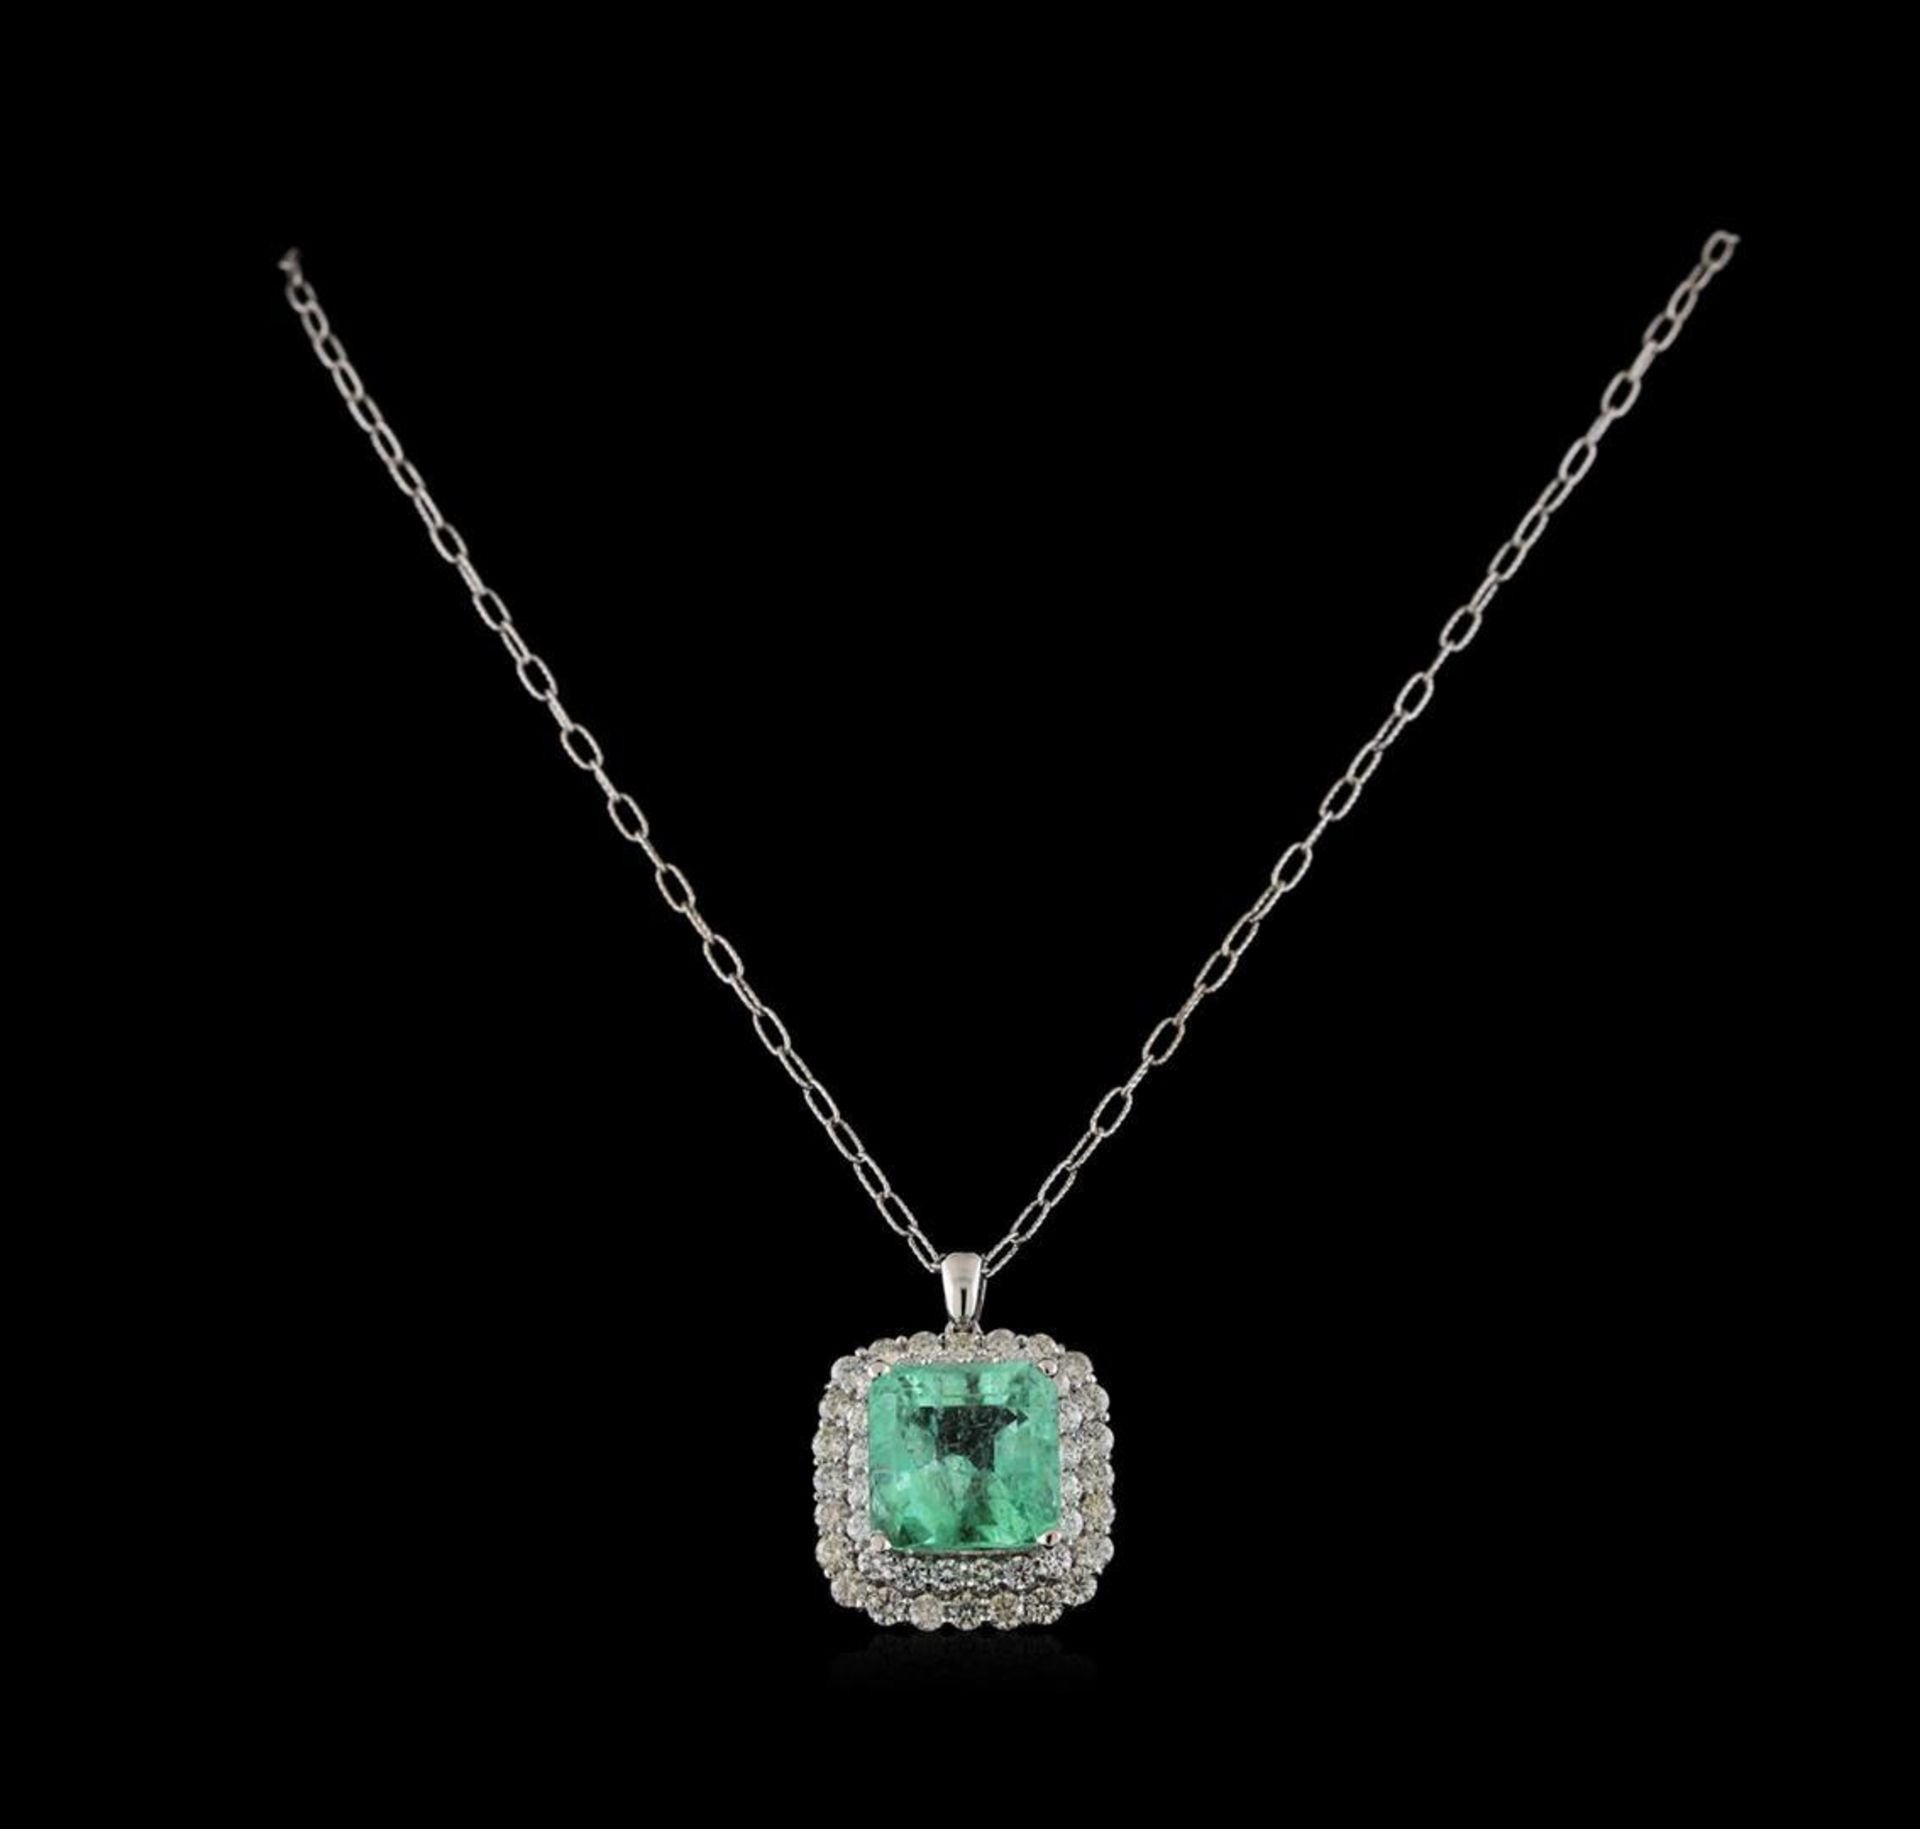 18.09 ctw Emerald and Diamond Pendant With Chain - 14KT White Gold - Image 2 of 4